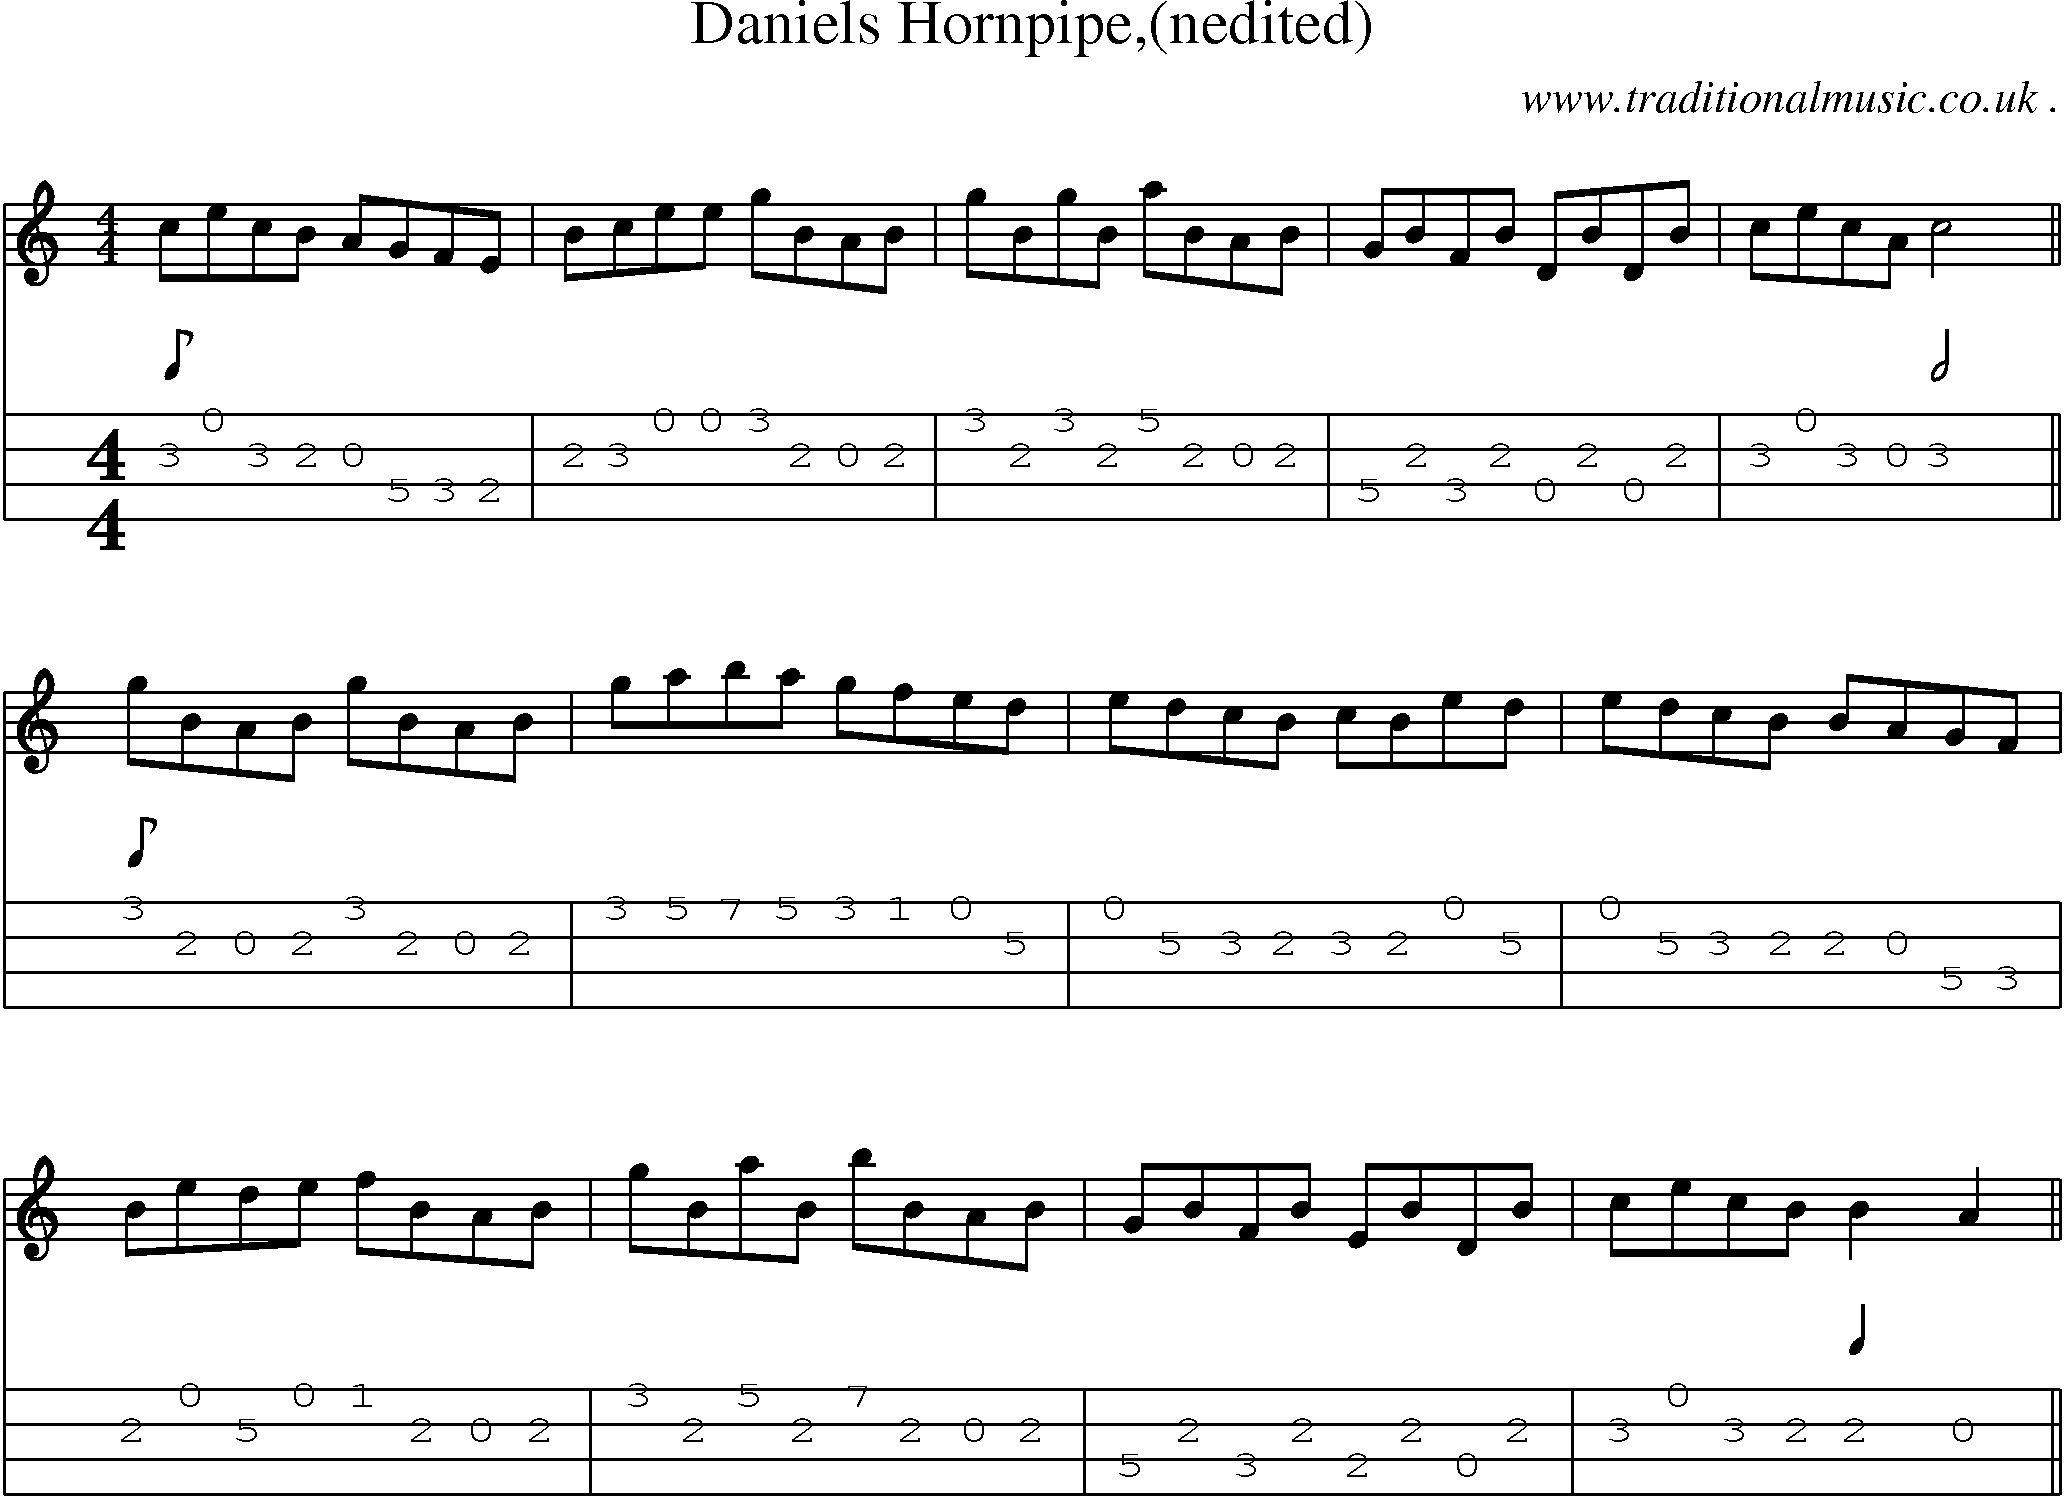 Sheet-Music and Mandolin Tabs for Daniels Hornpipe(nedited)